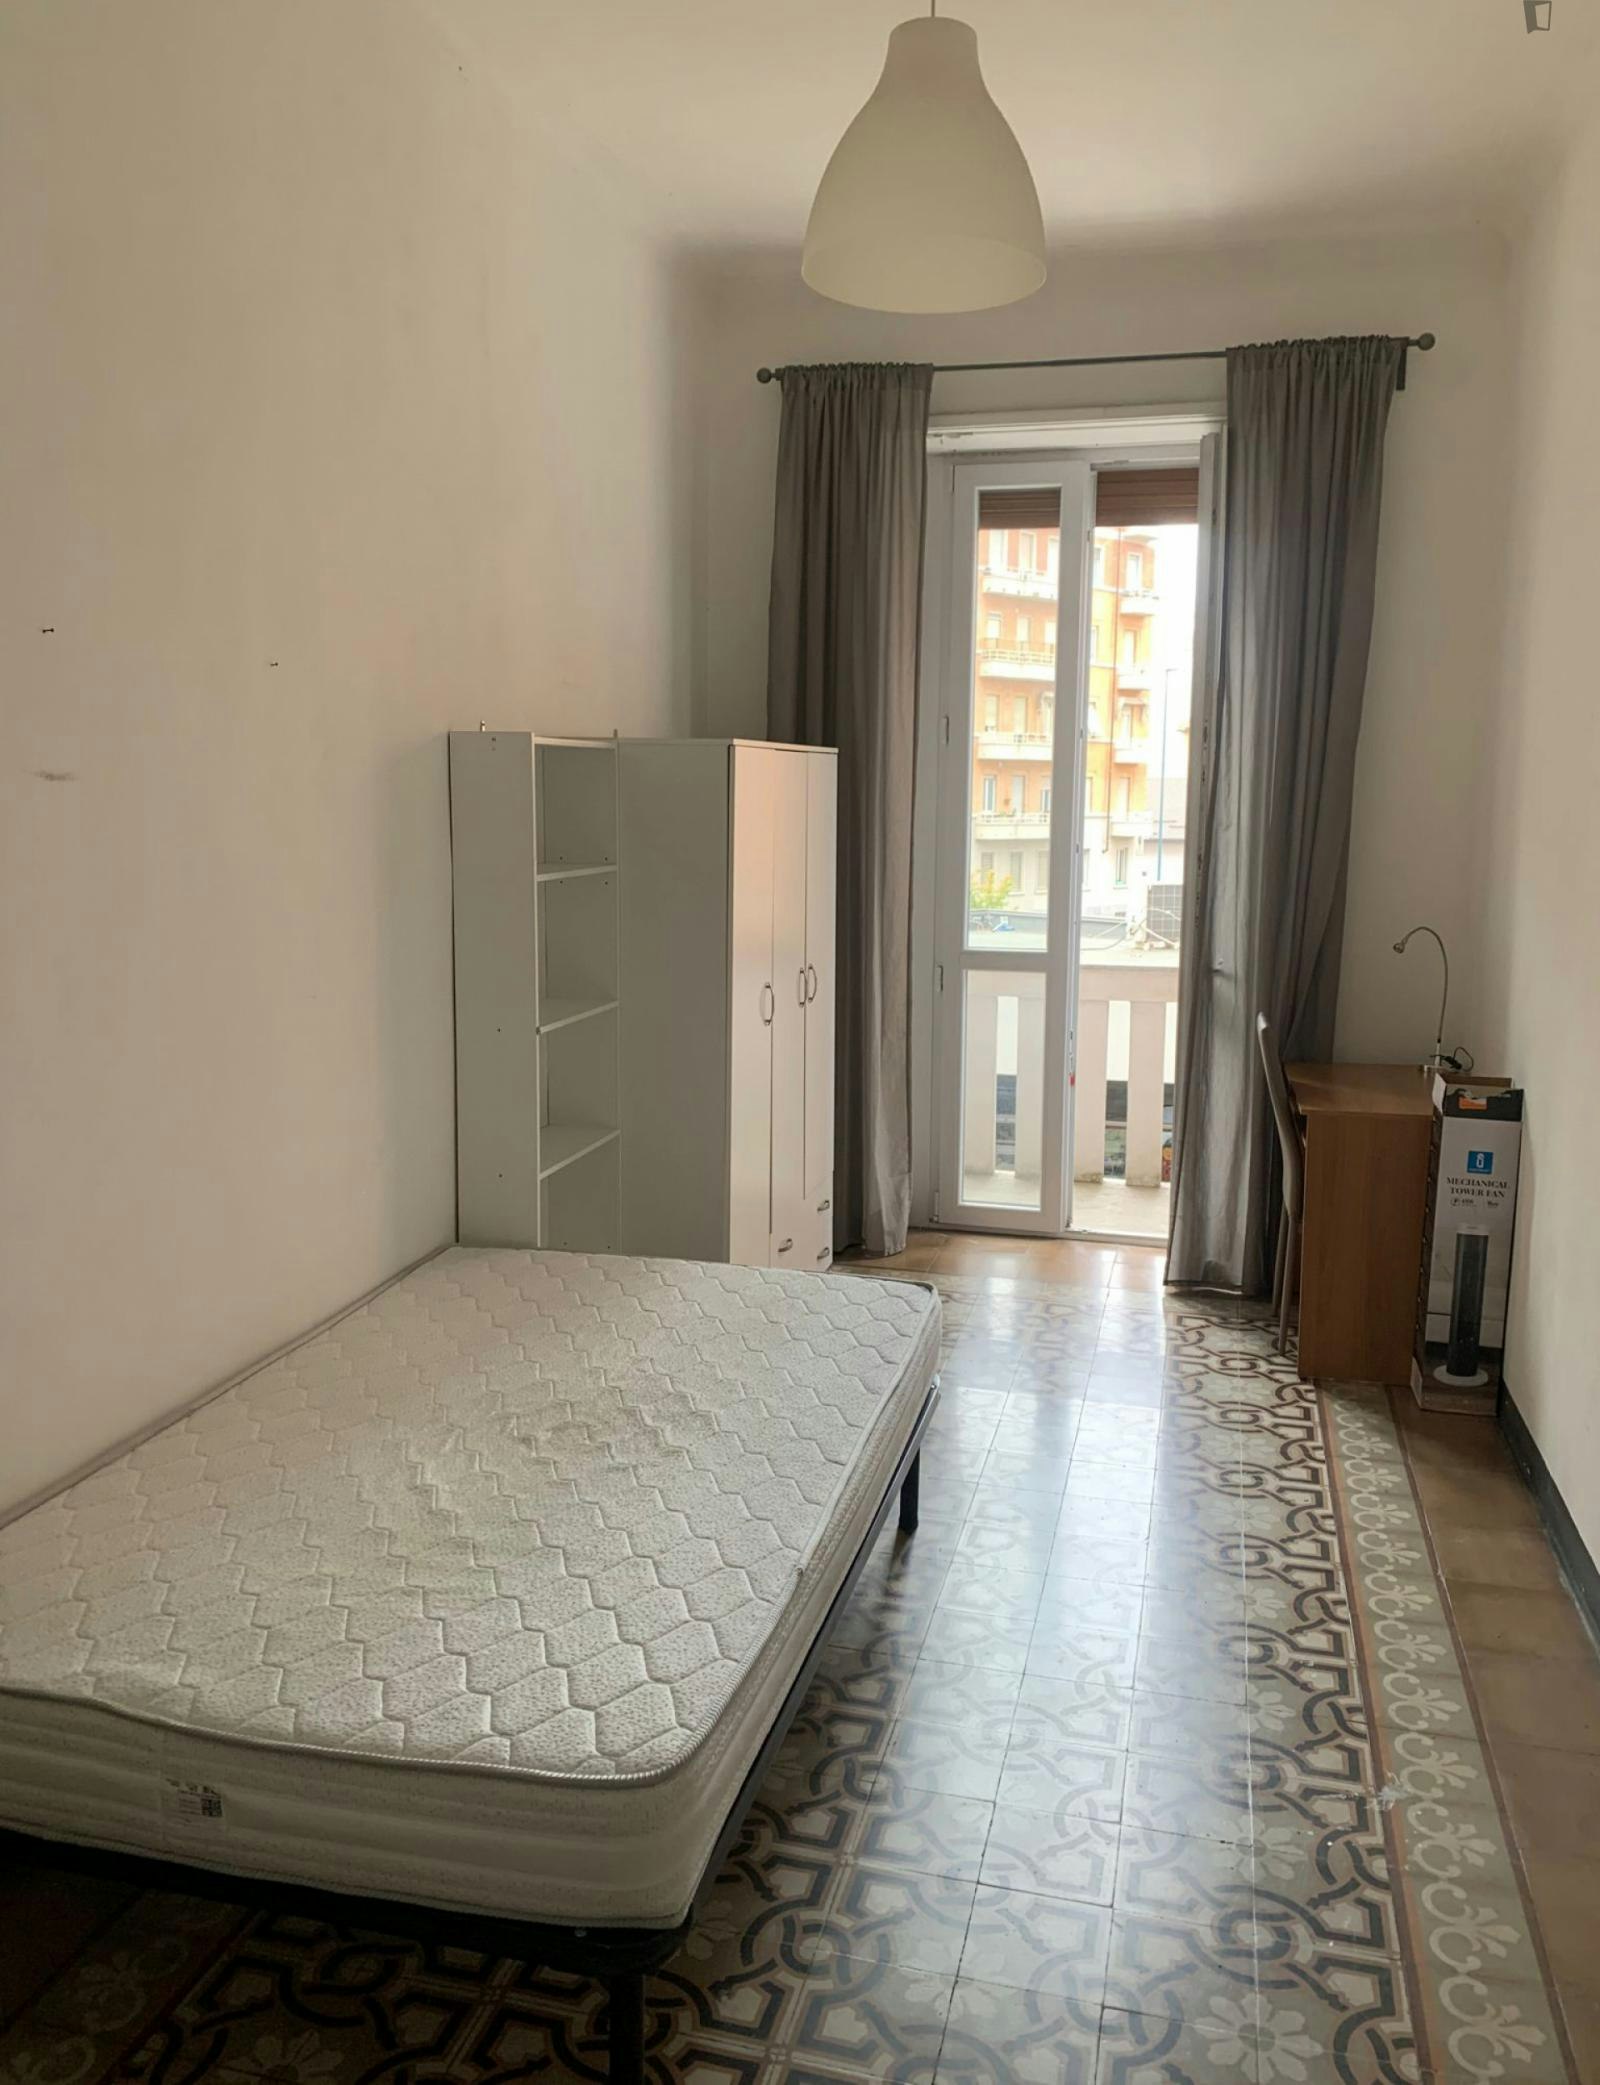 Homely bedroom not far from Politecnico